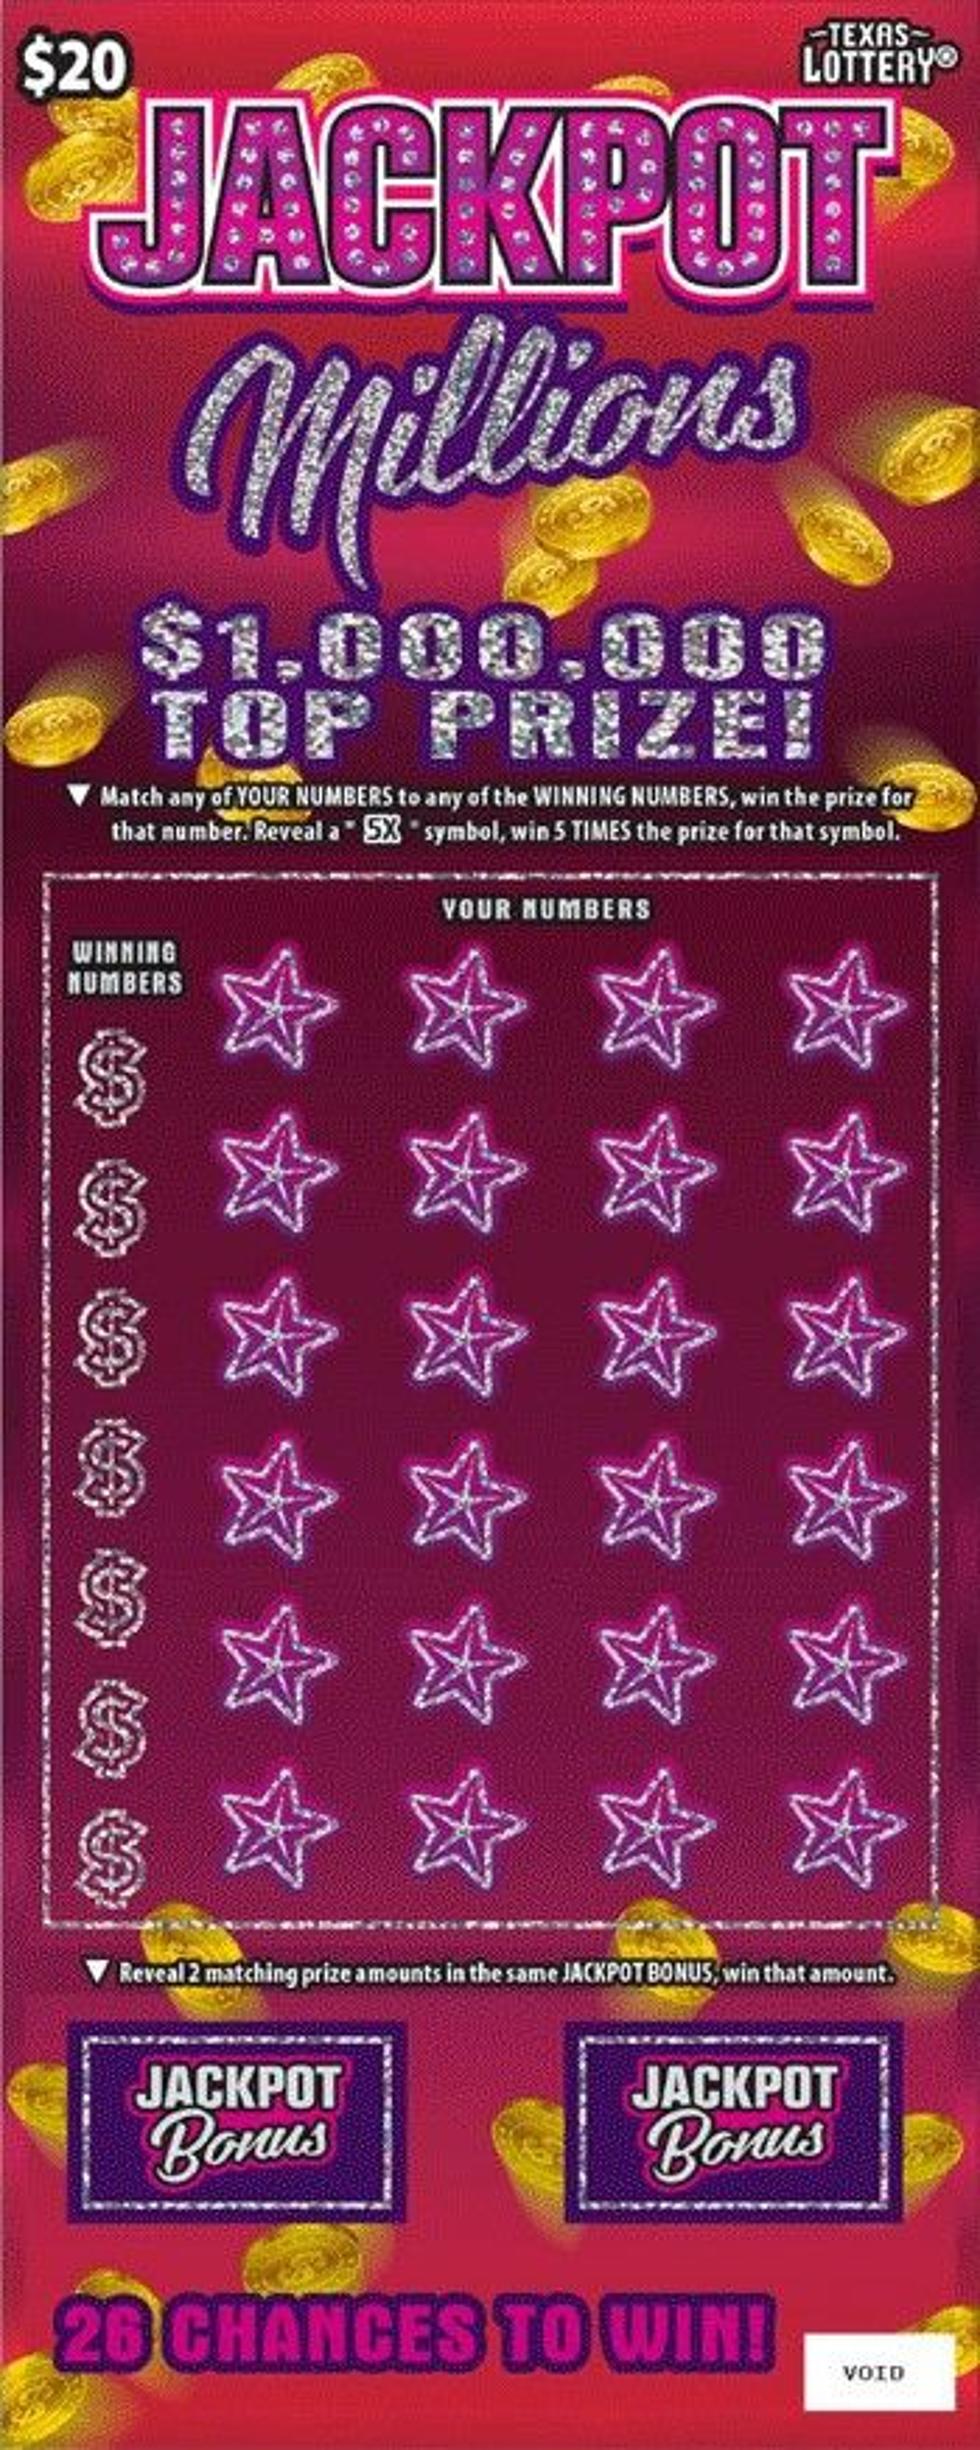 Which Texas Lottery Scratch-Offs Have The Most Big Jackpots Left?